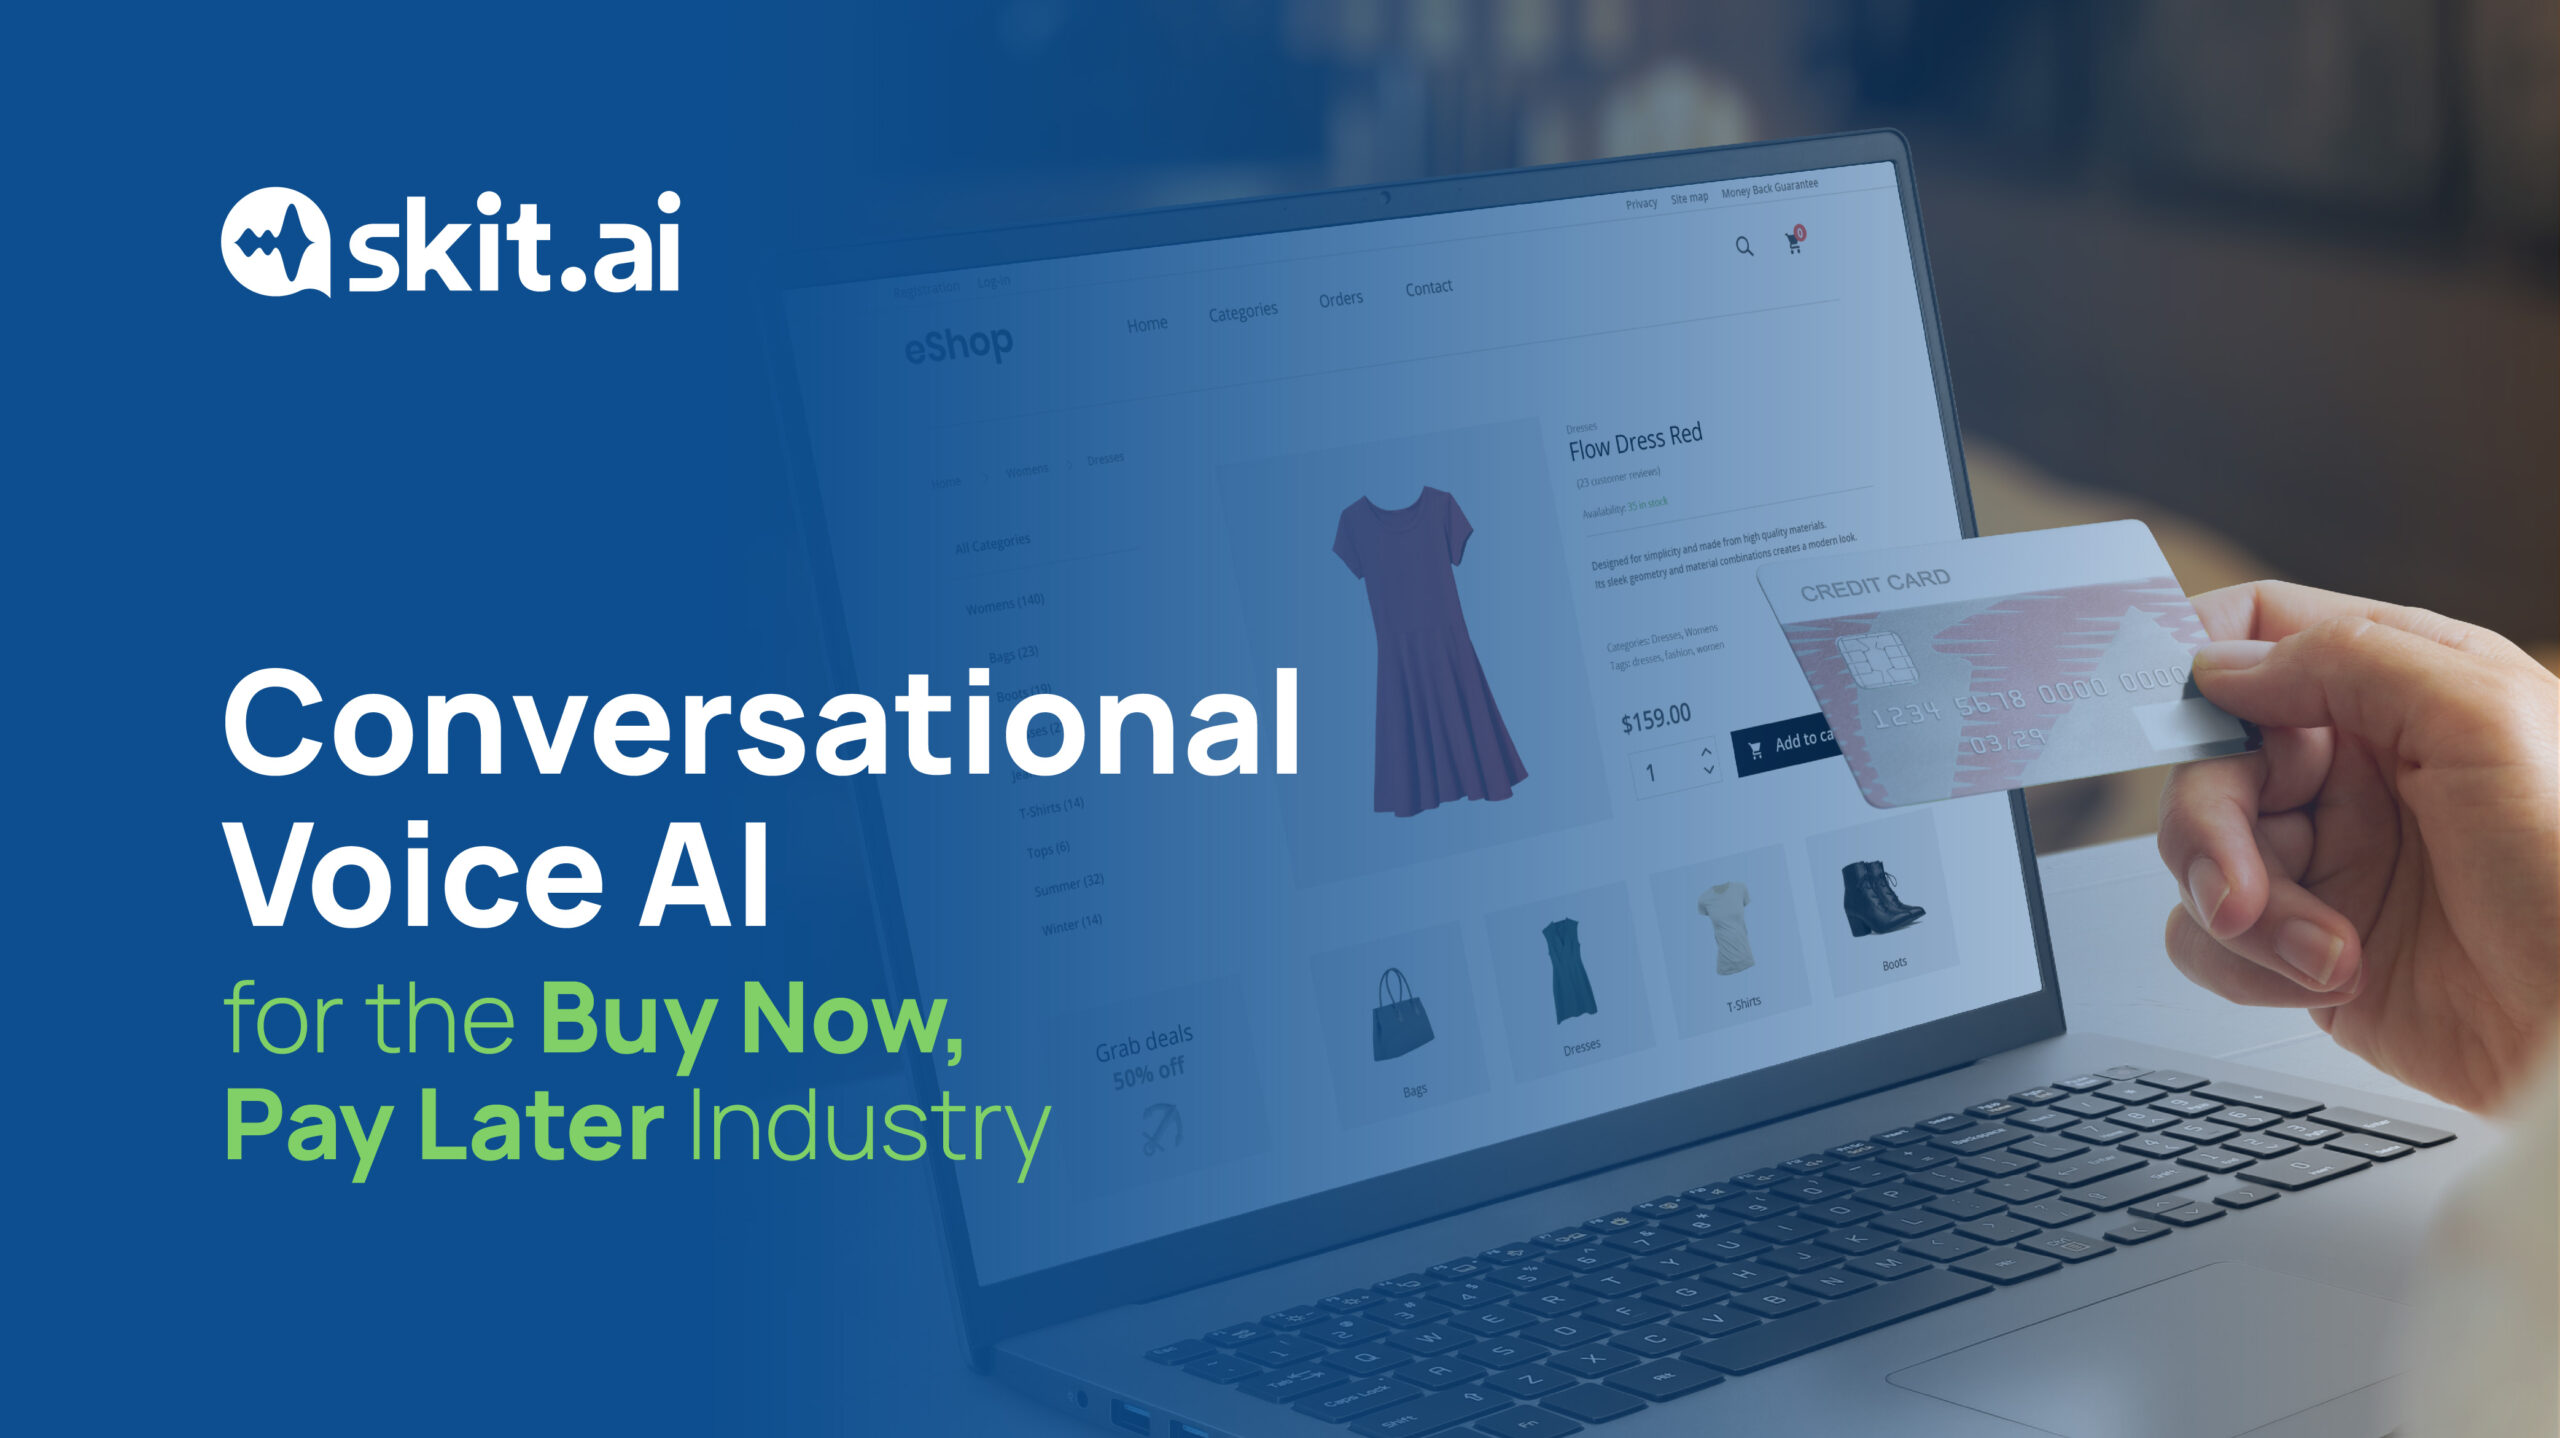 Why Buy Now, Pay Later Companies Are Turning To Voice AI for Collections